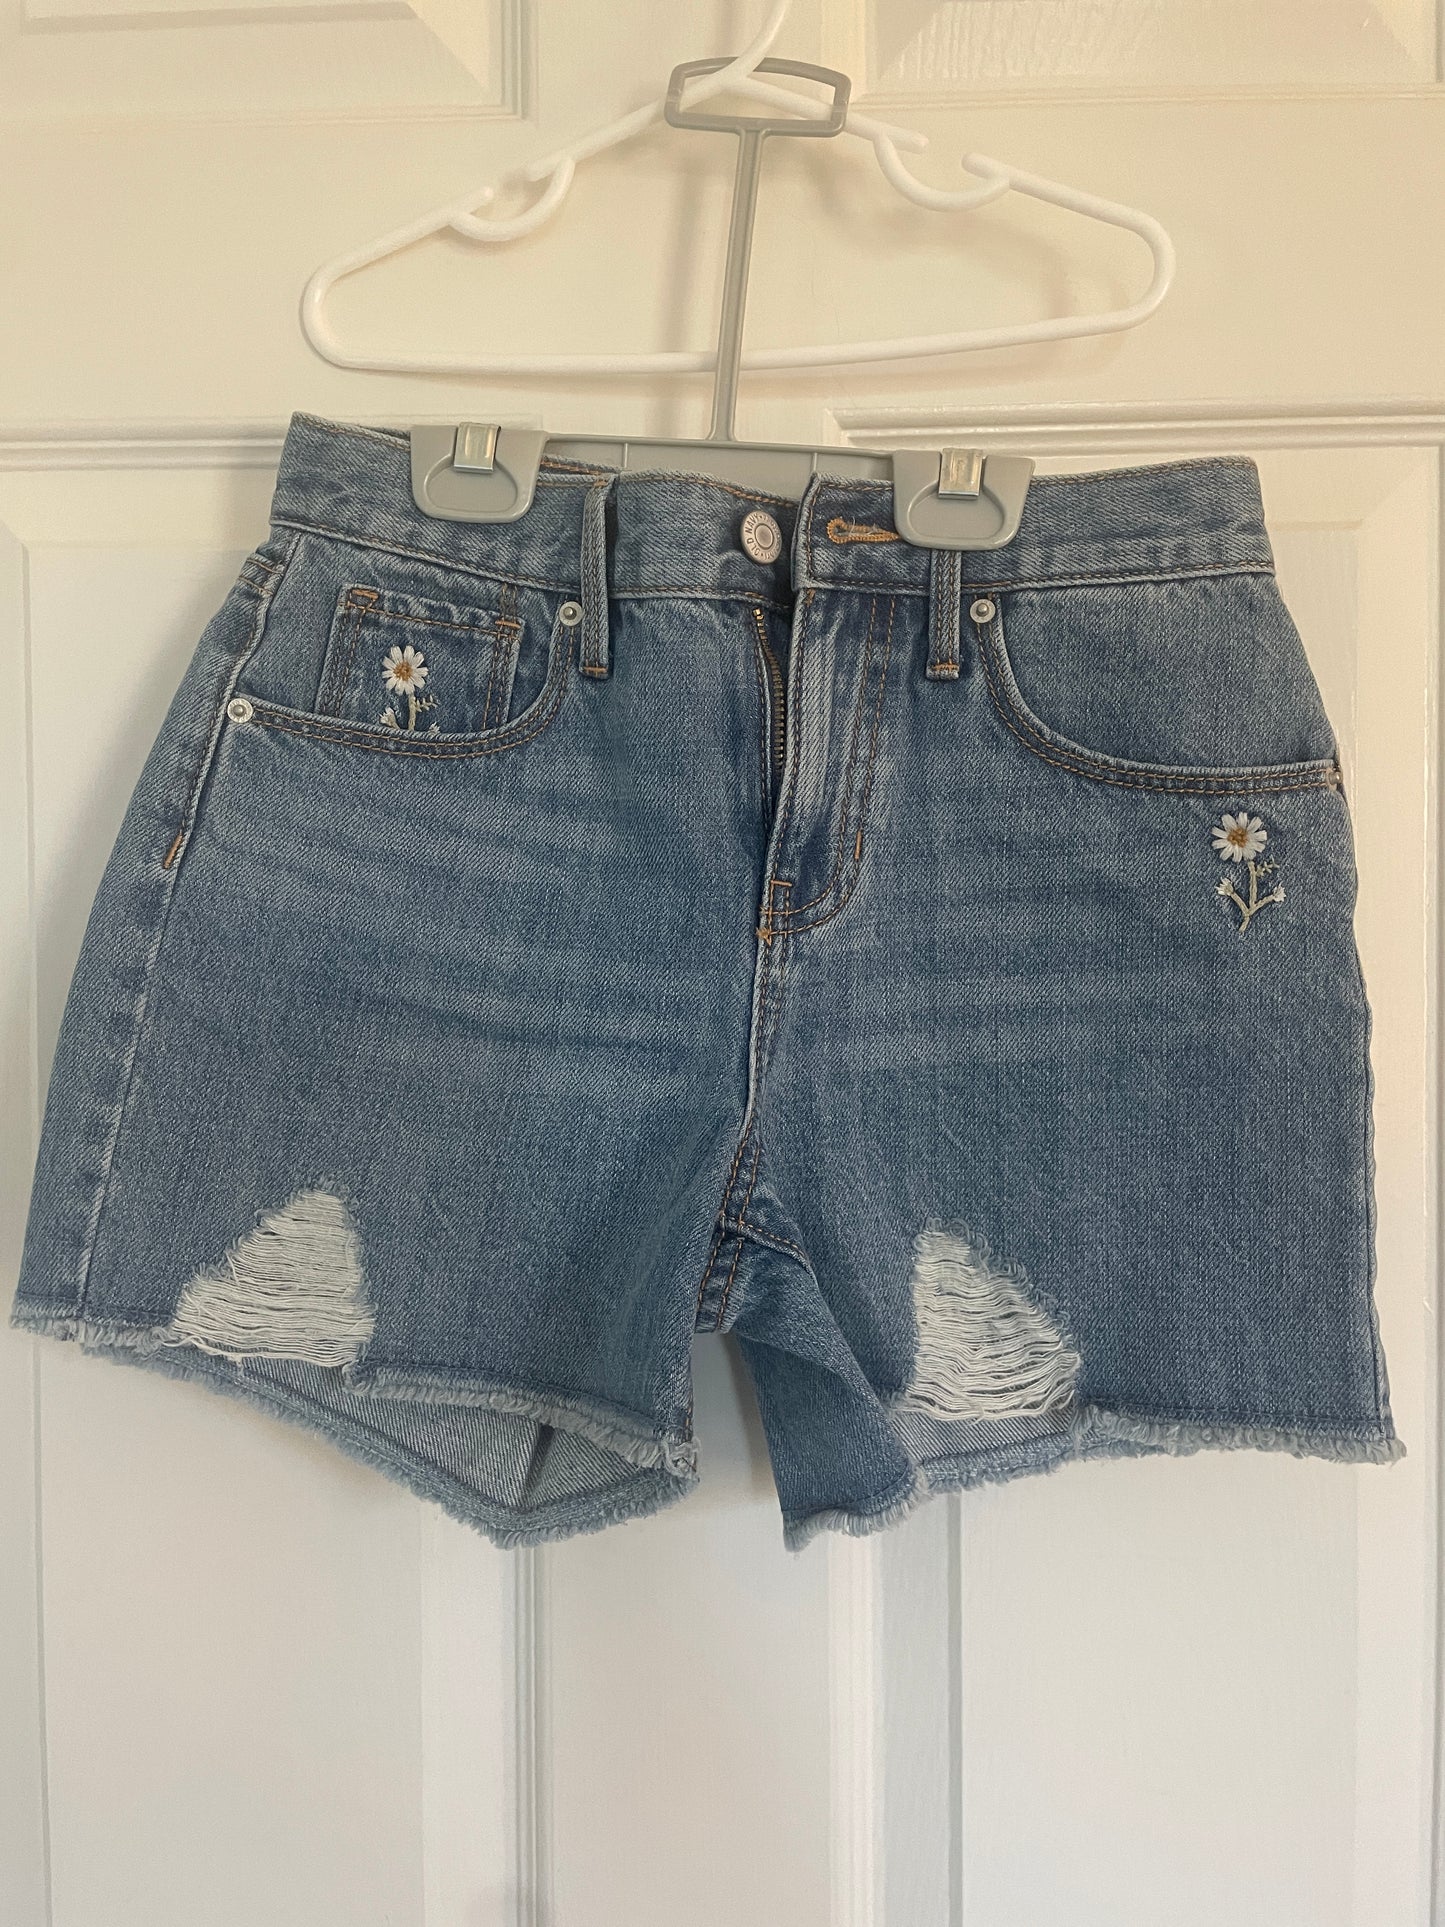 Girls NWT Old Navy Jean Shorts Size 10